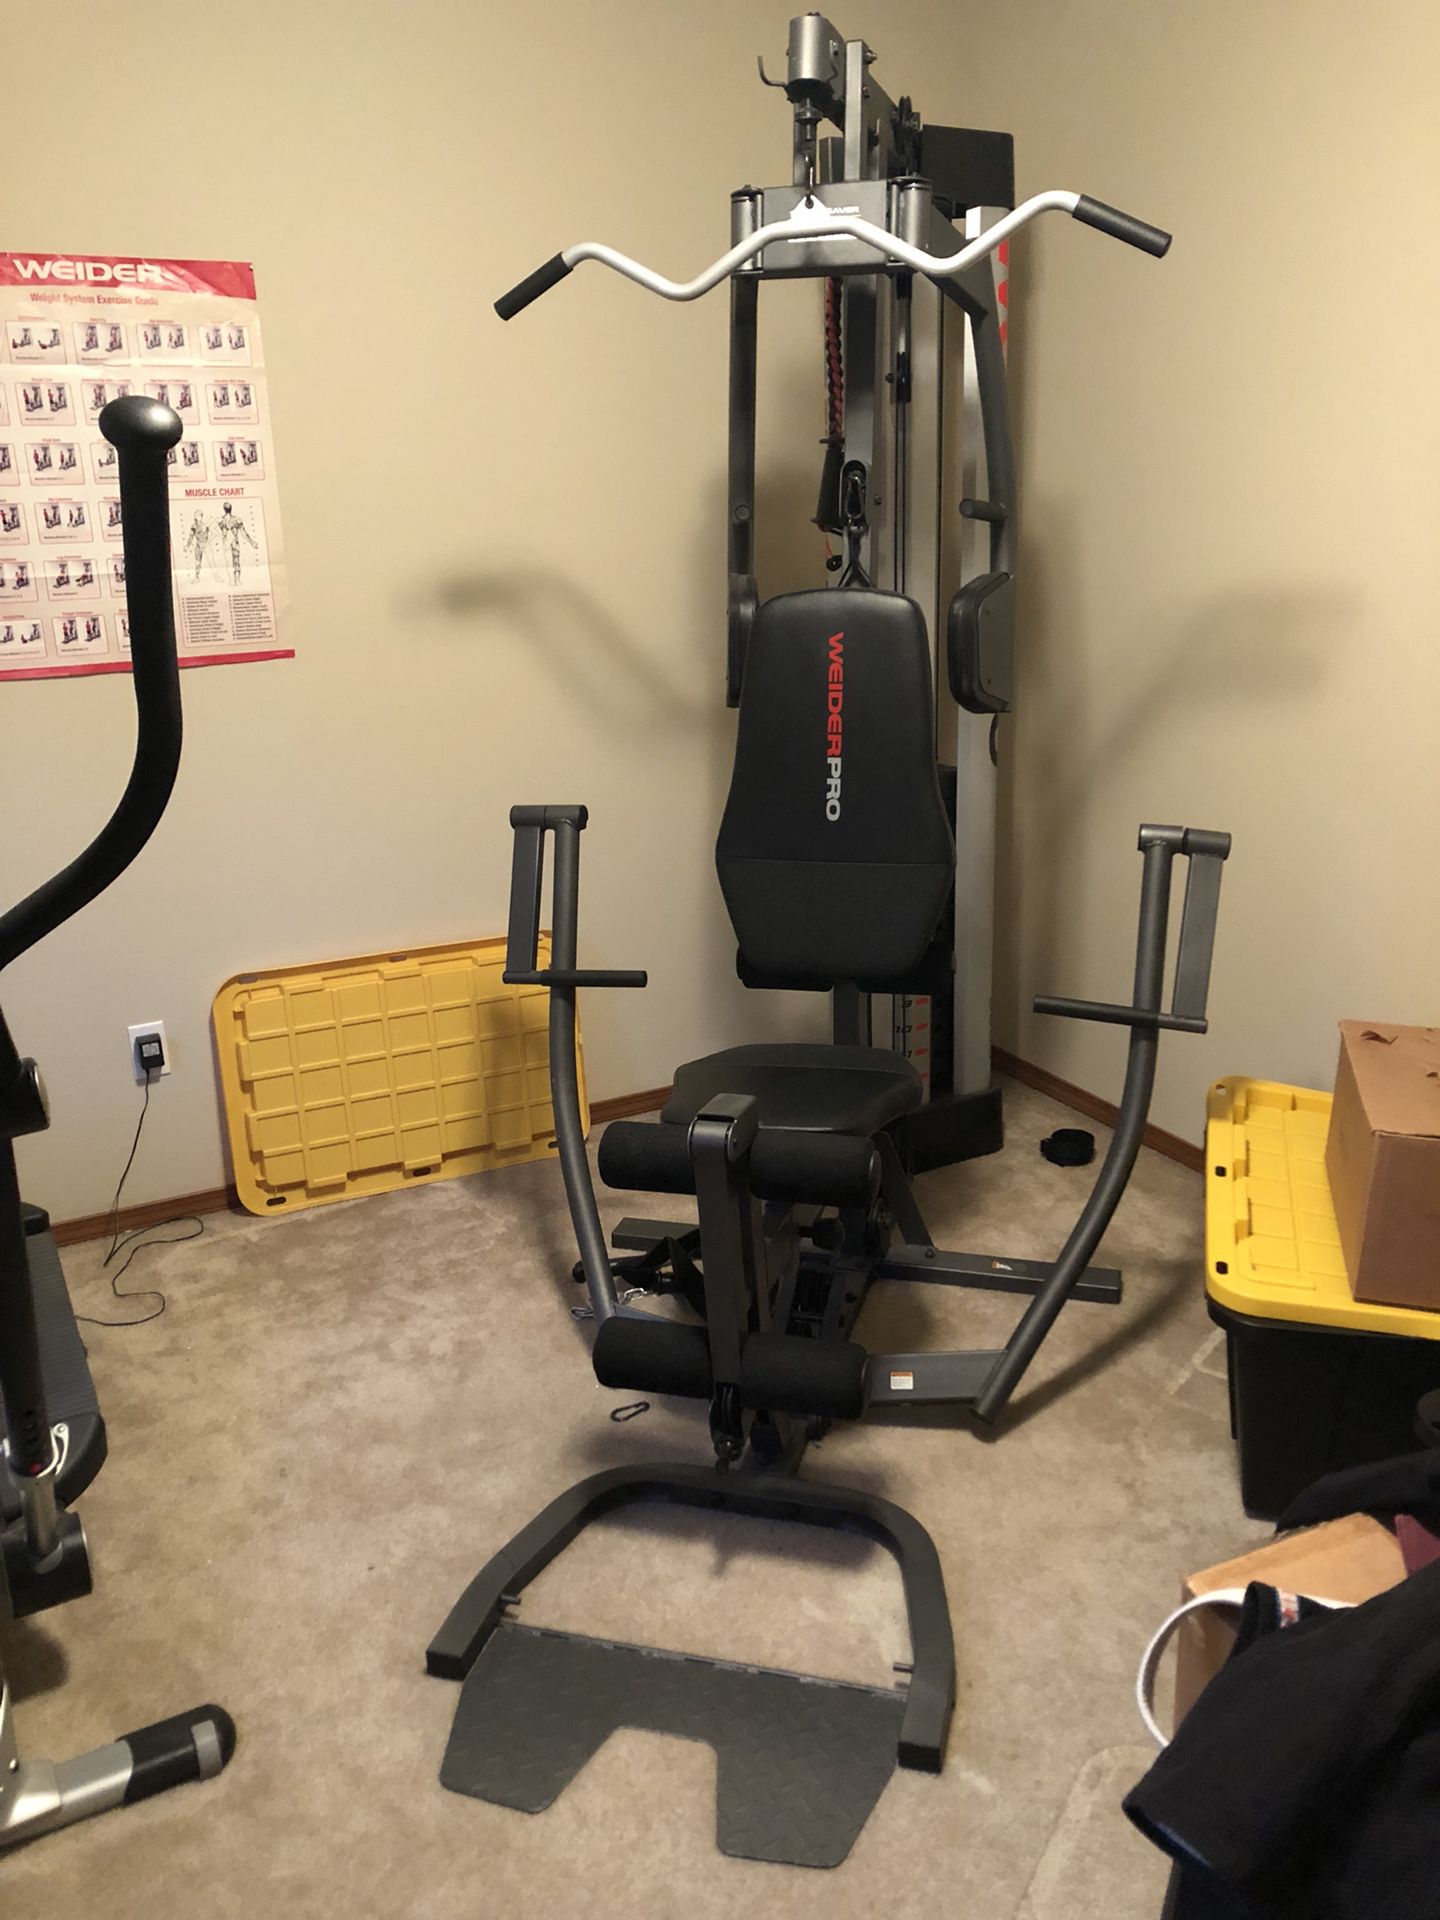 Weider Pro 8900 Weight System disassembled & ready 4 pick up